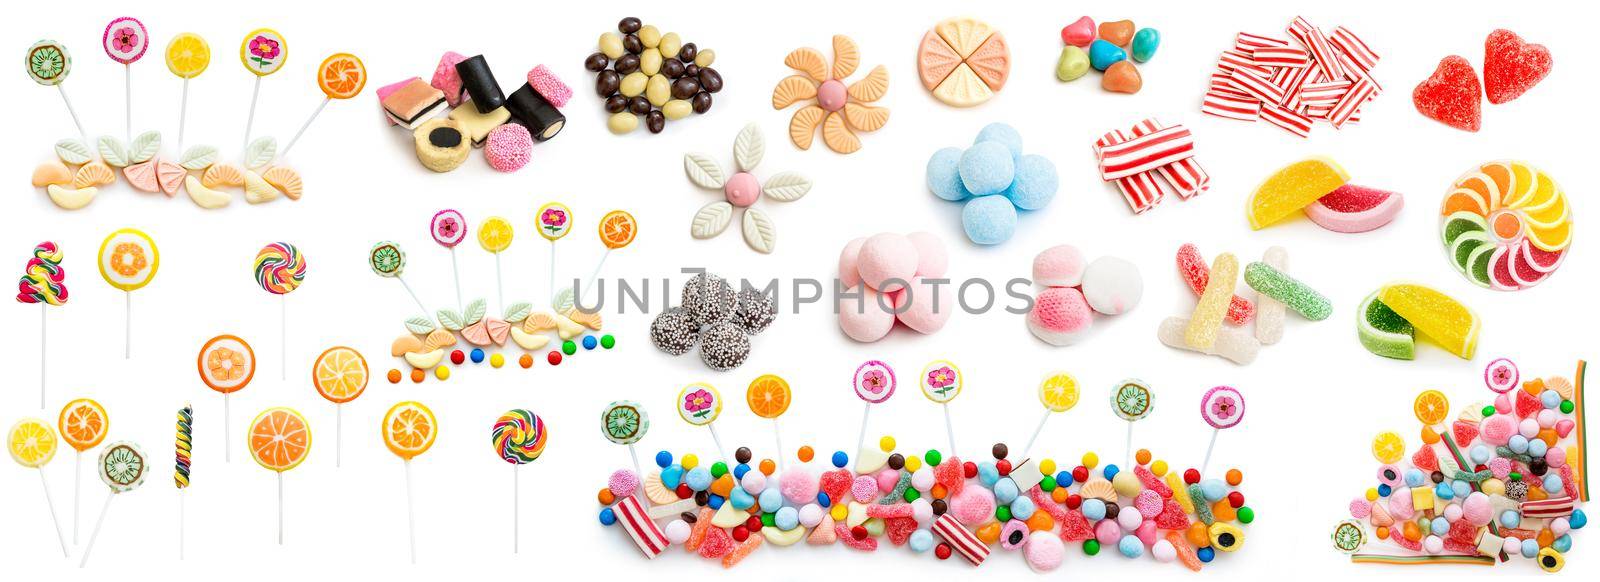 Collage of white and milk chocolate and candies isolated on white background